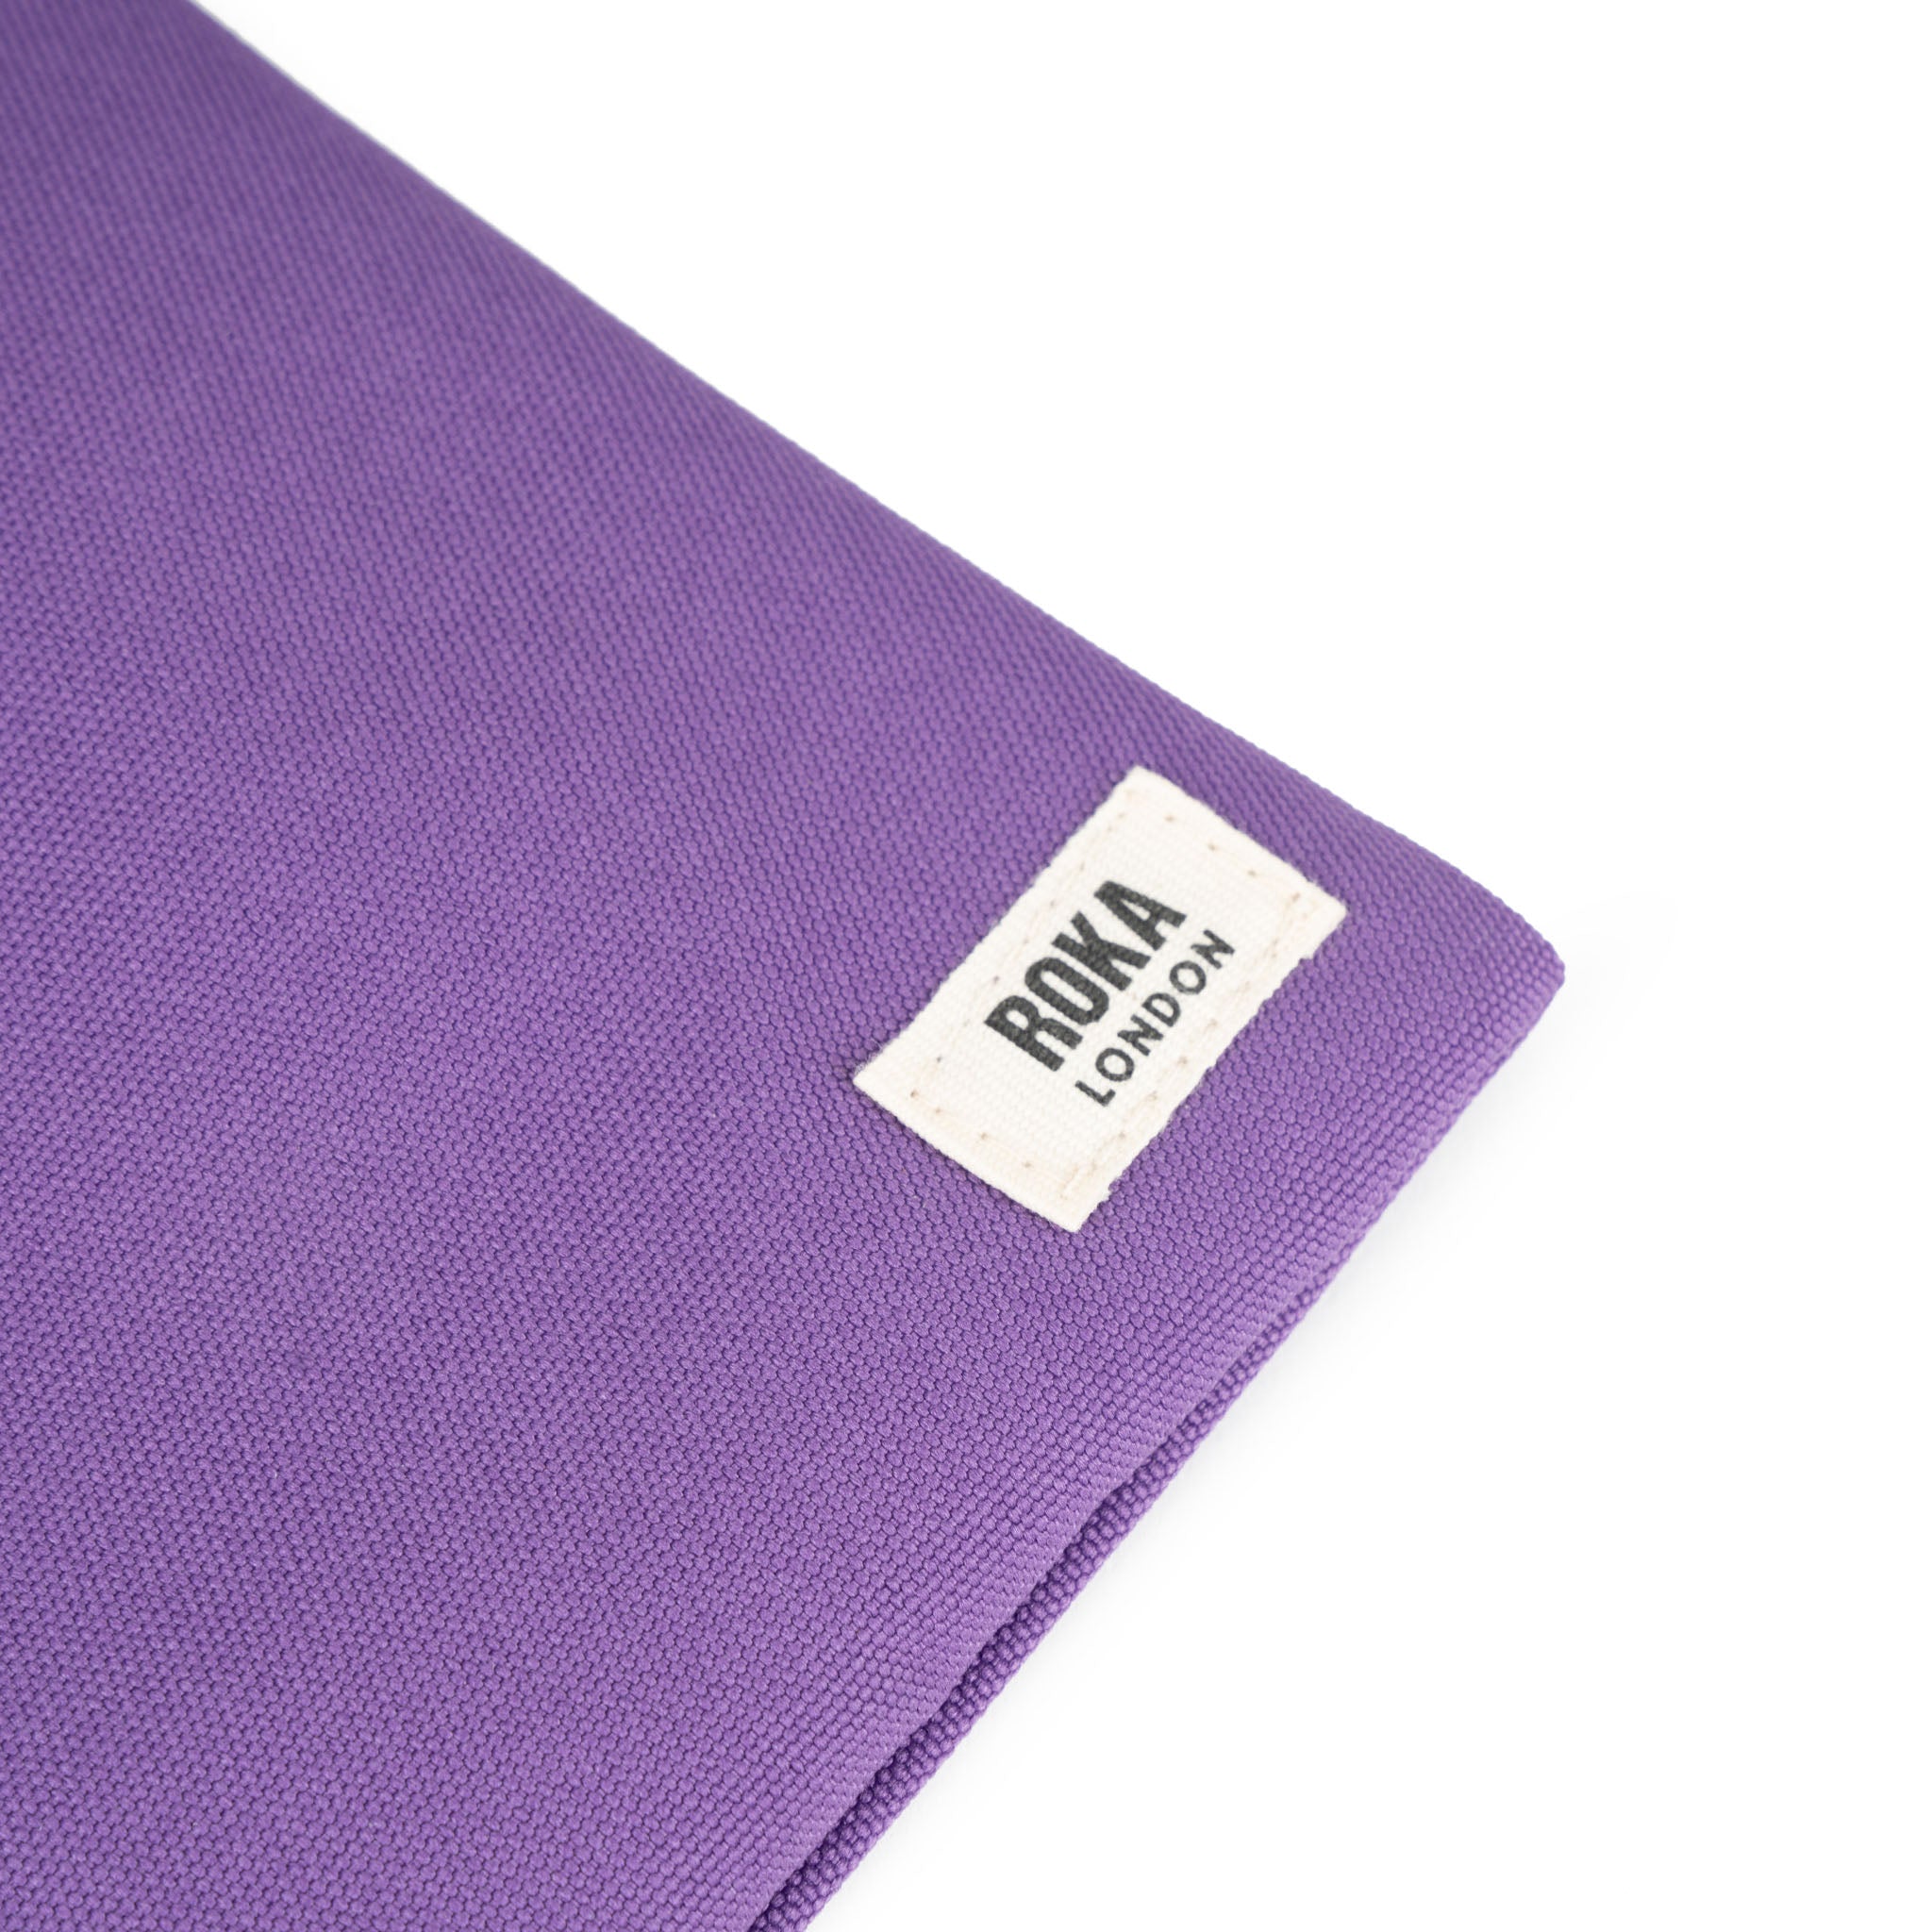 Roka Chelsea Recycled Canvas Imperial Purple